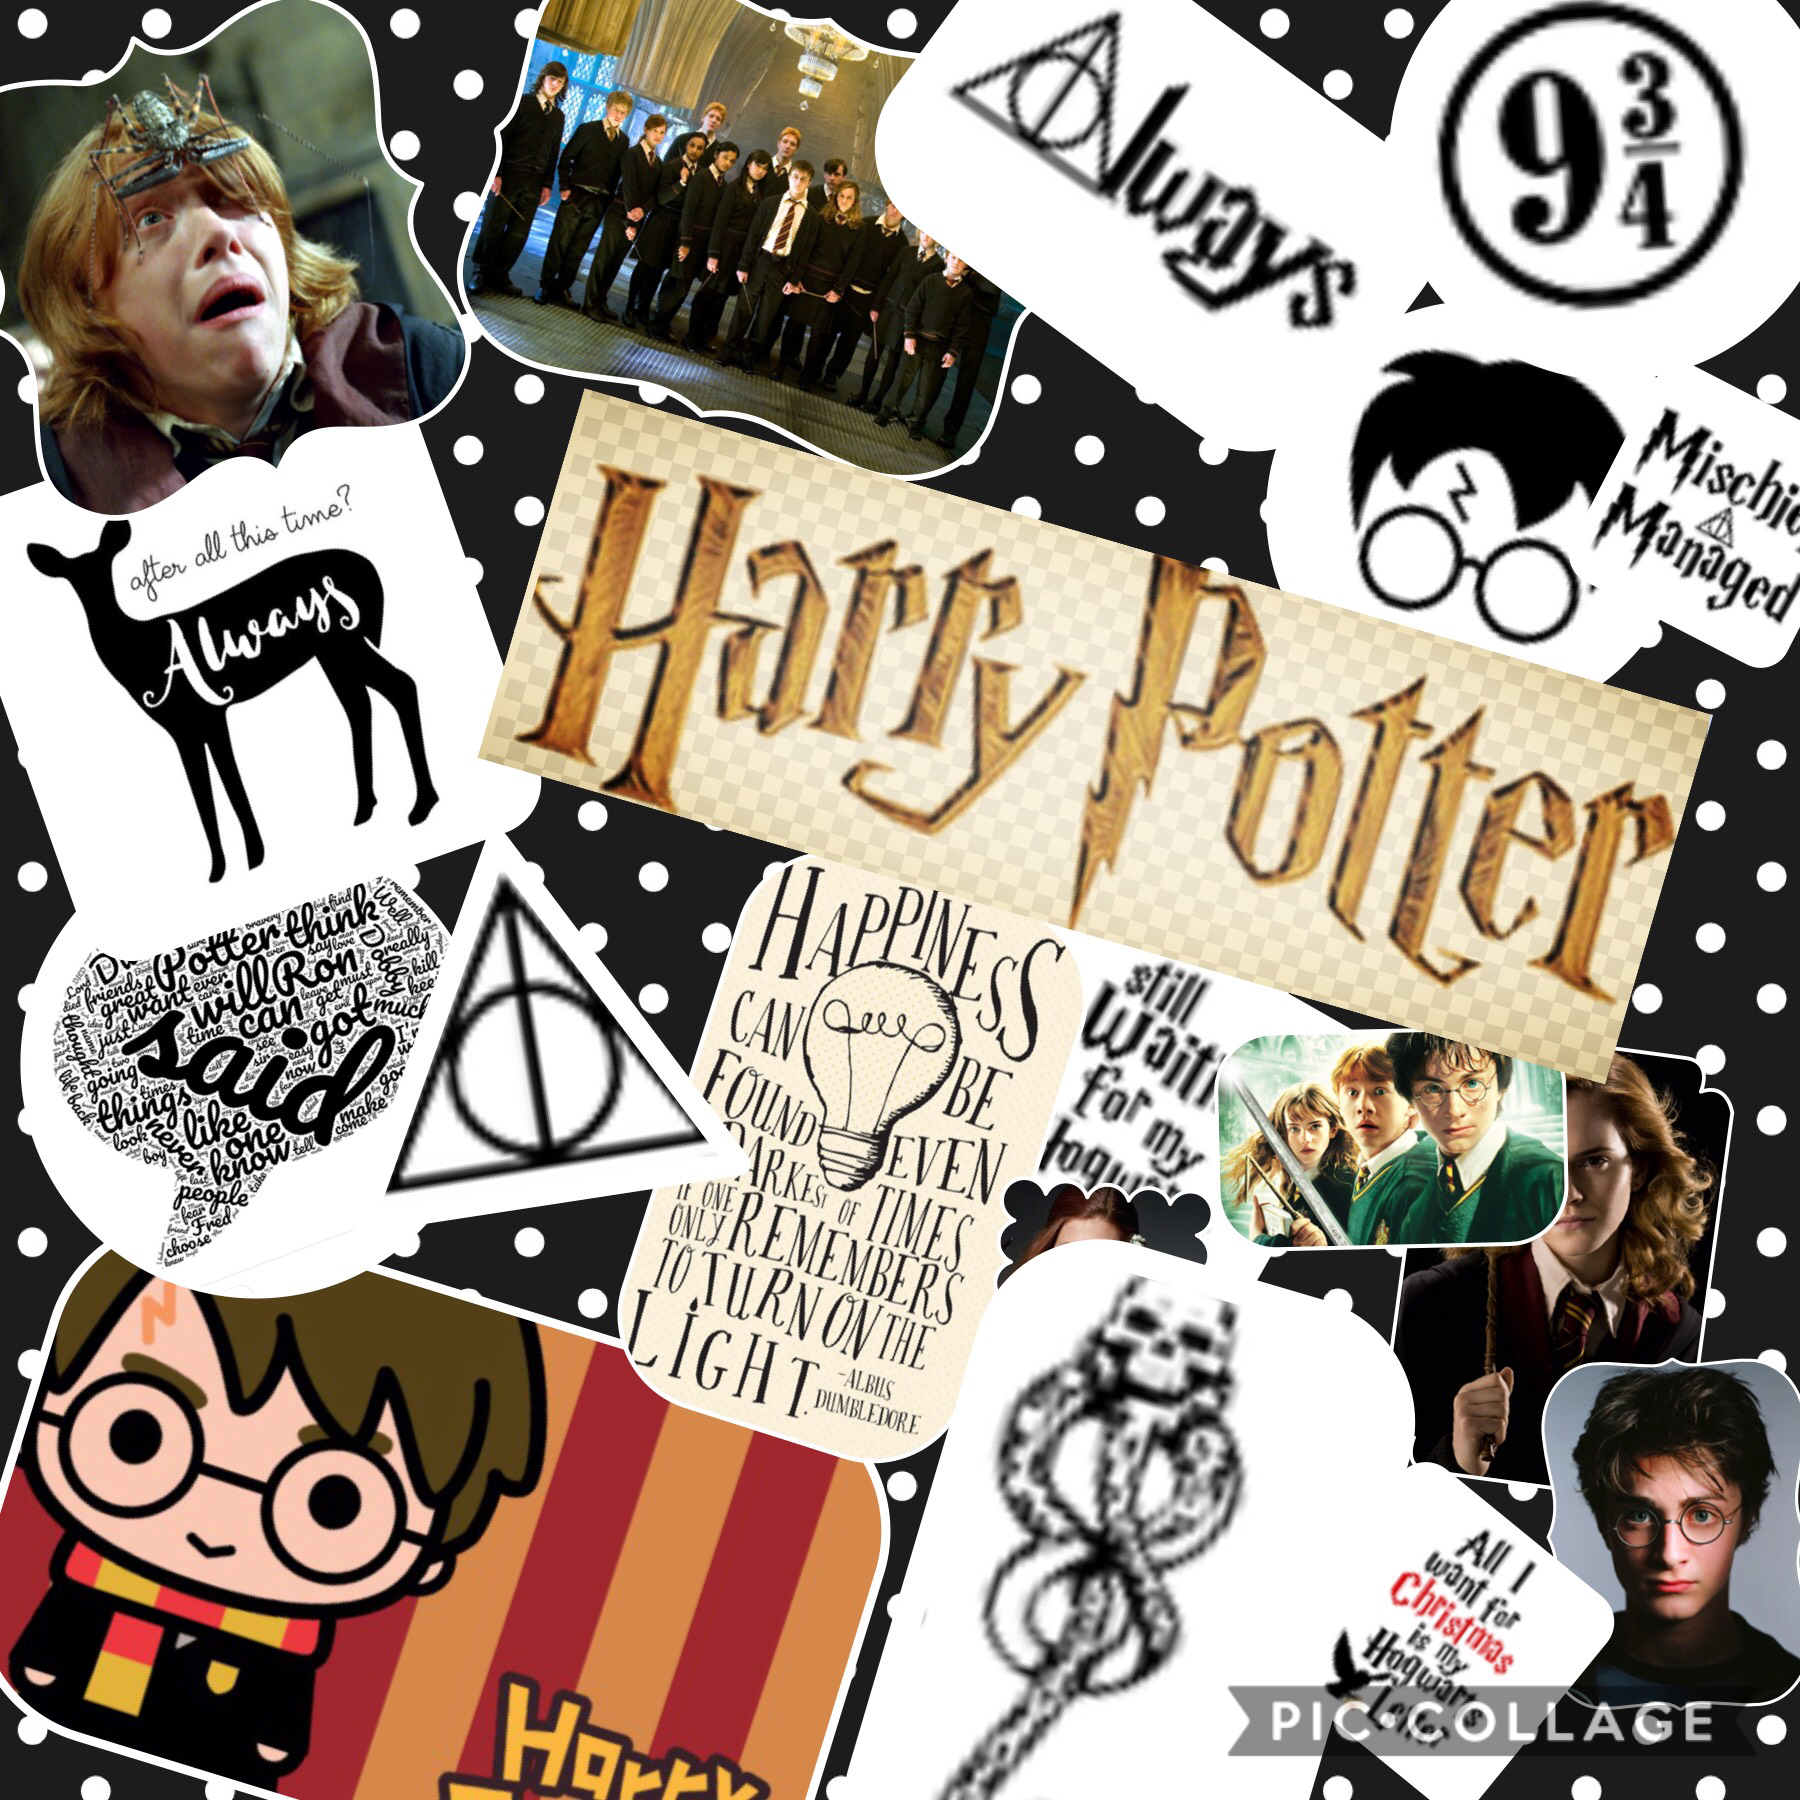 If you’re a POTTERHEAD, please like and support a fellow potterhead.